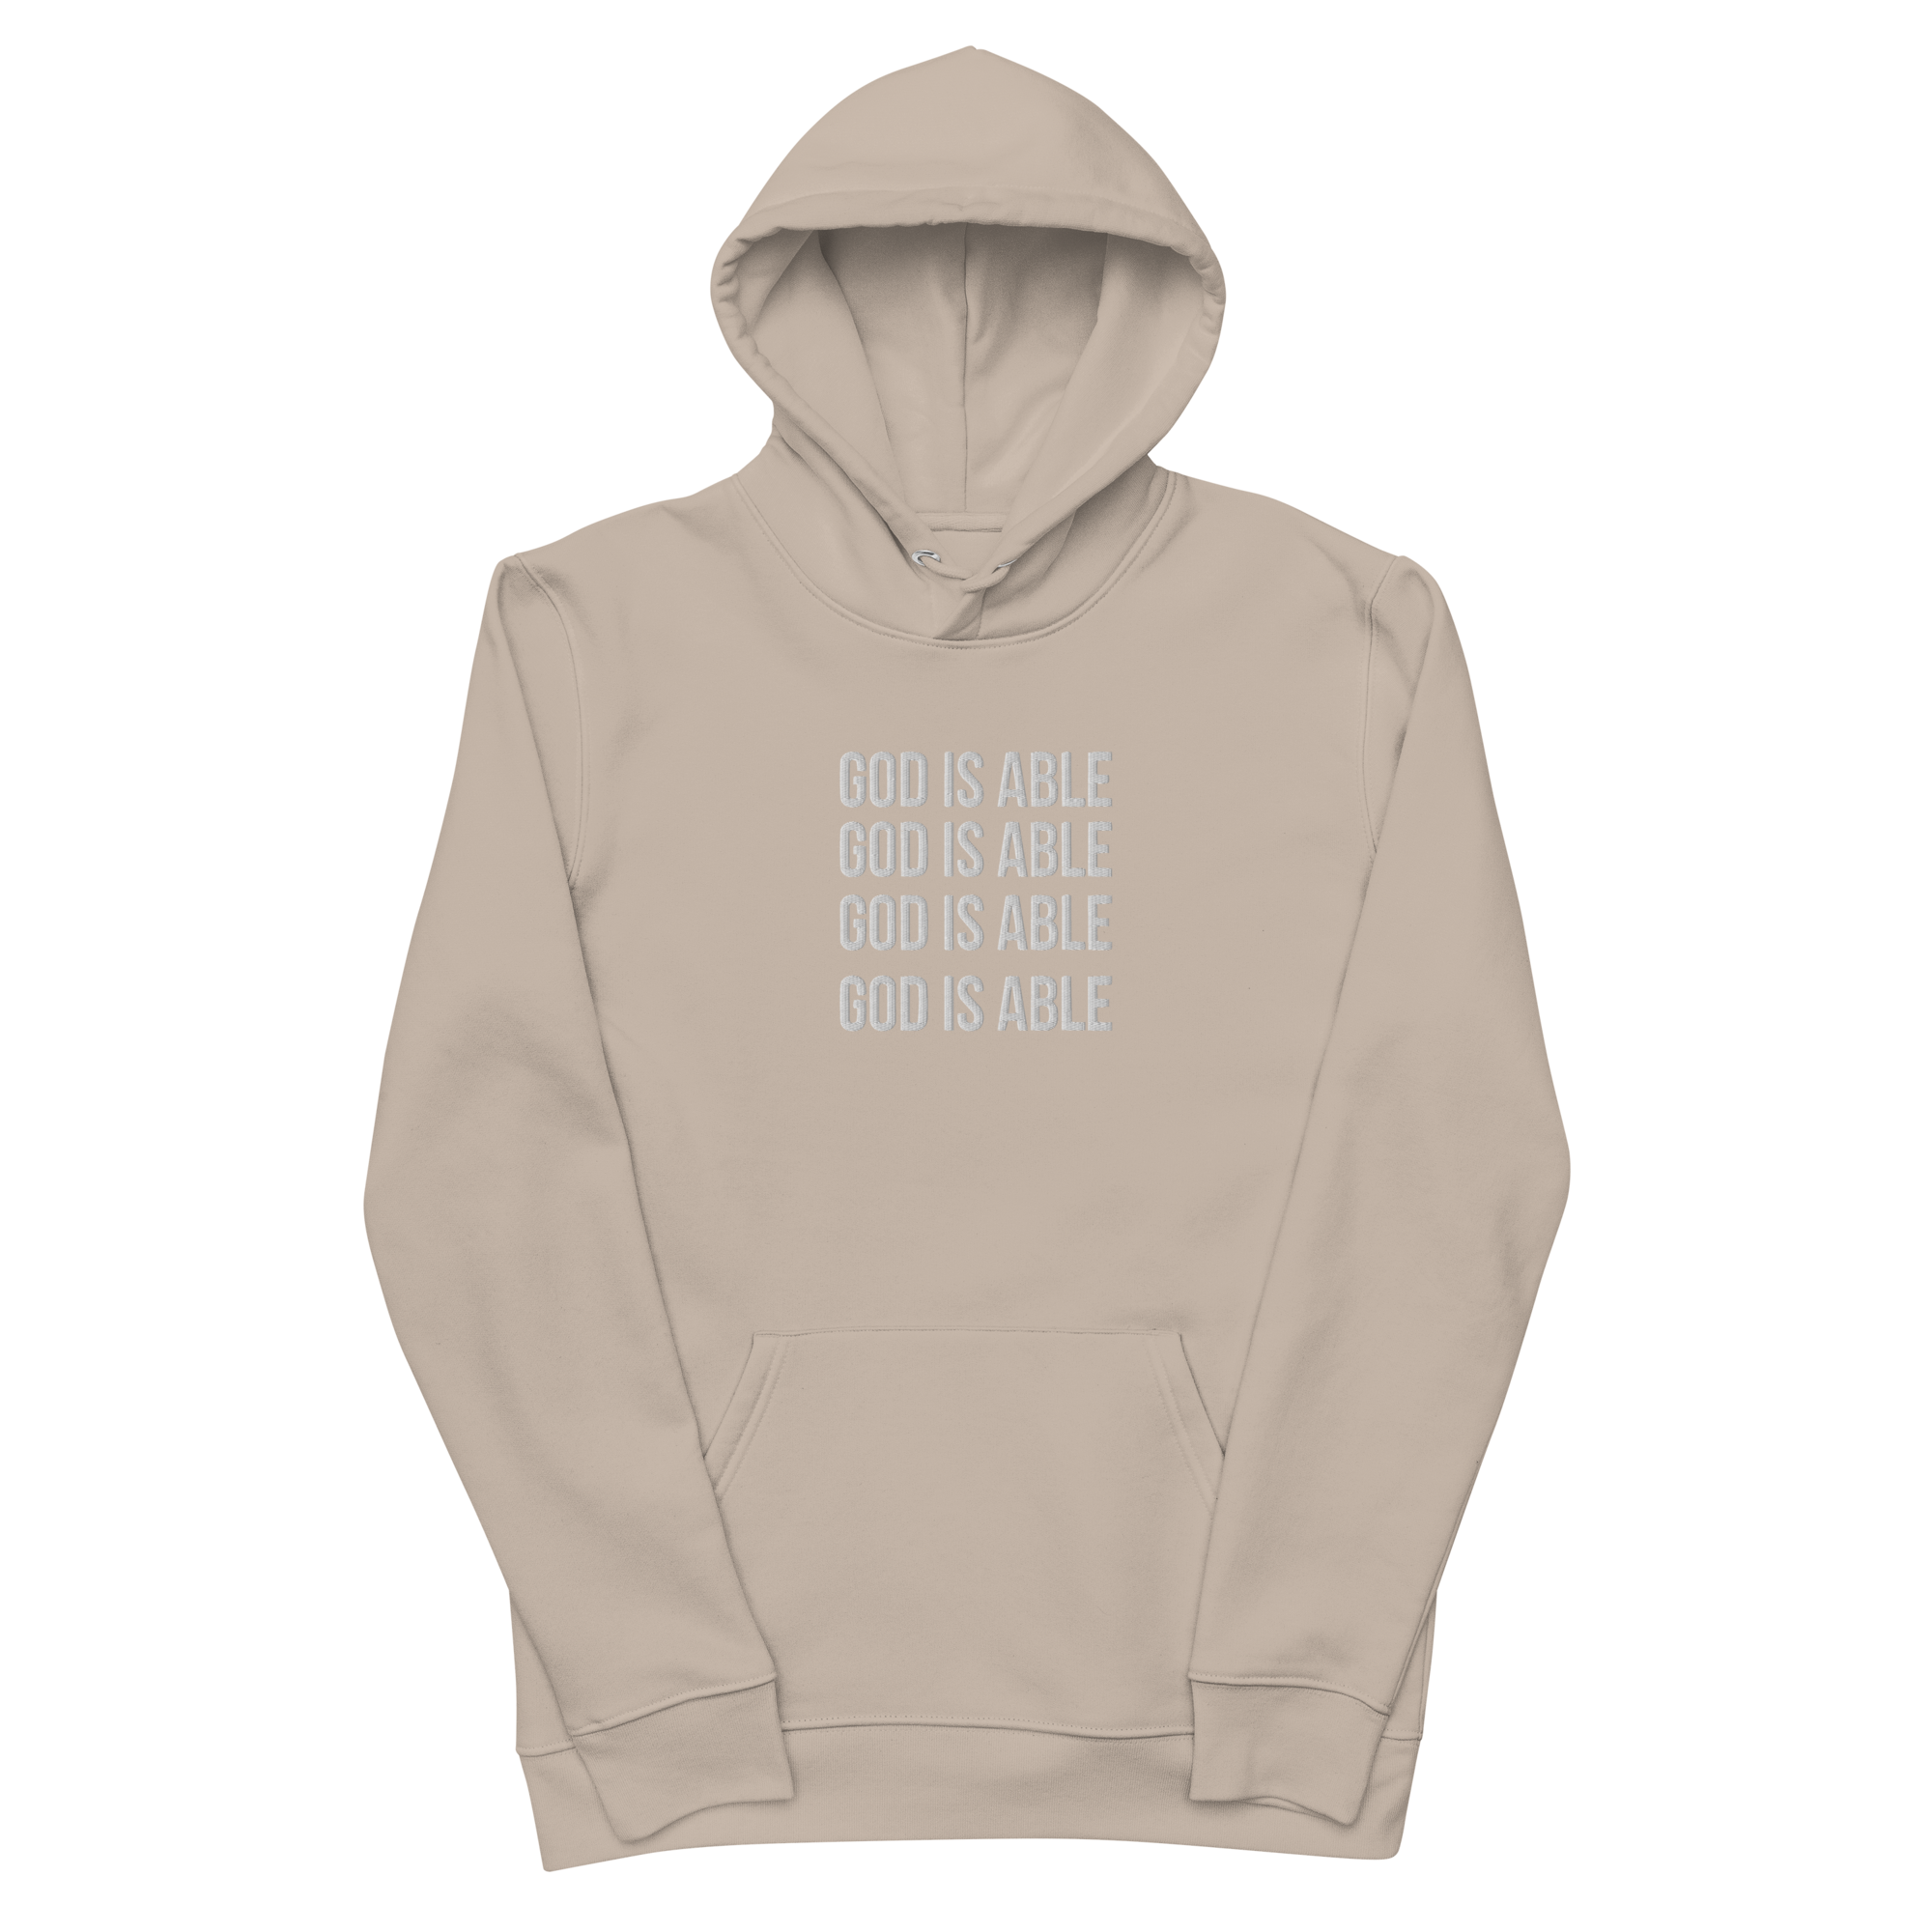 The "Chyna" Hoodie (Large Embroidered)